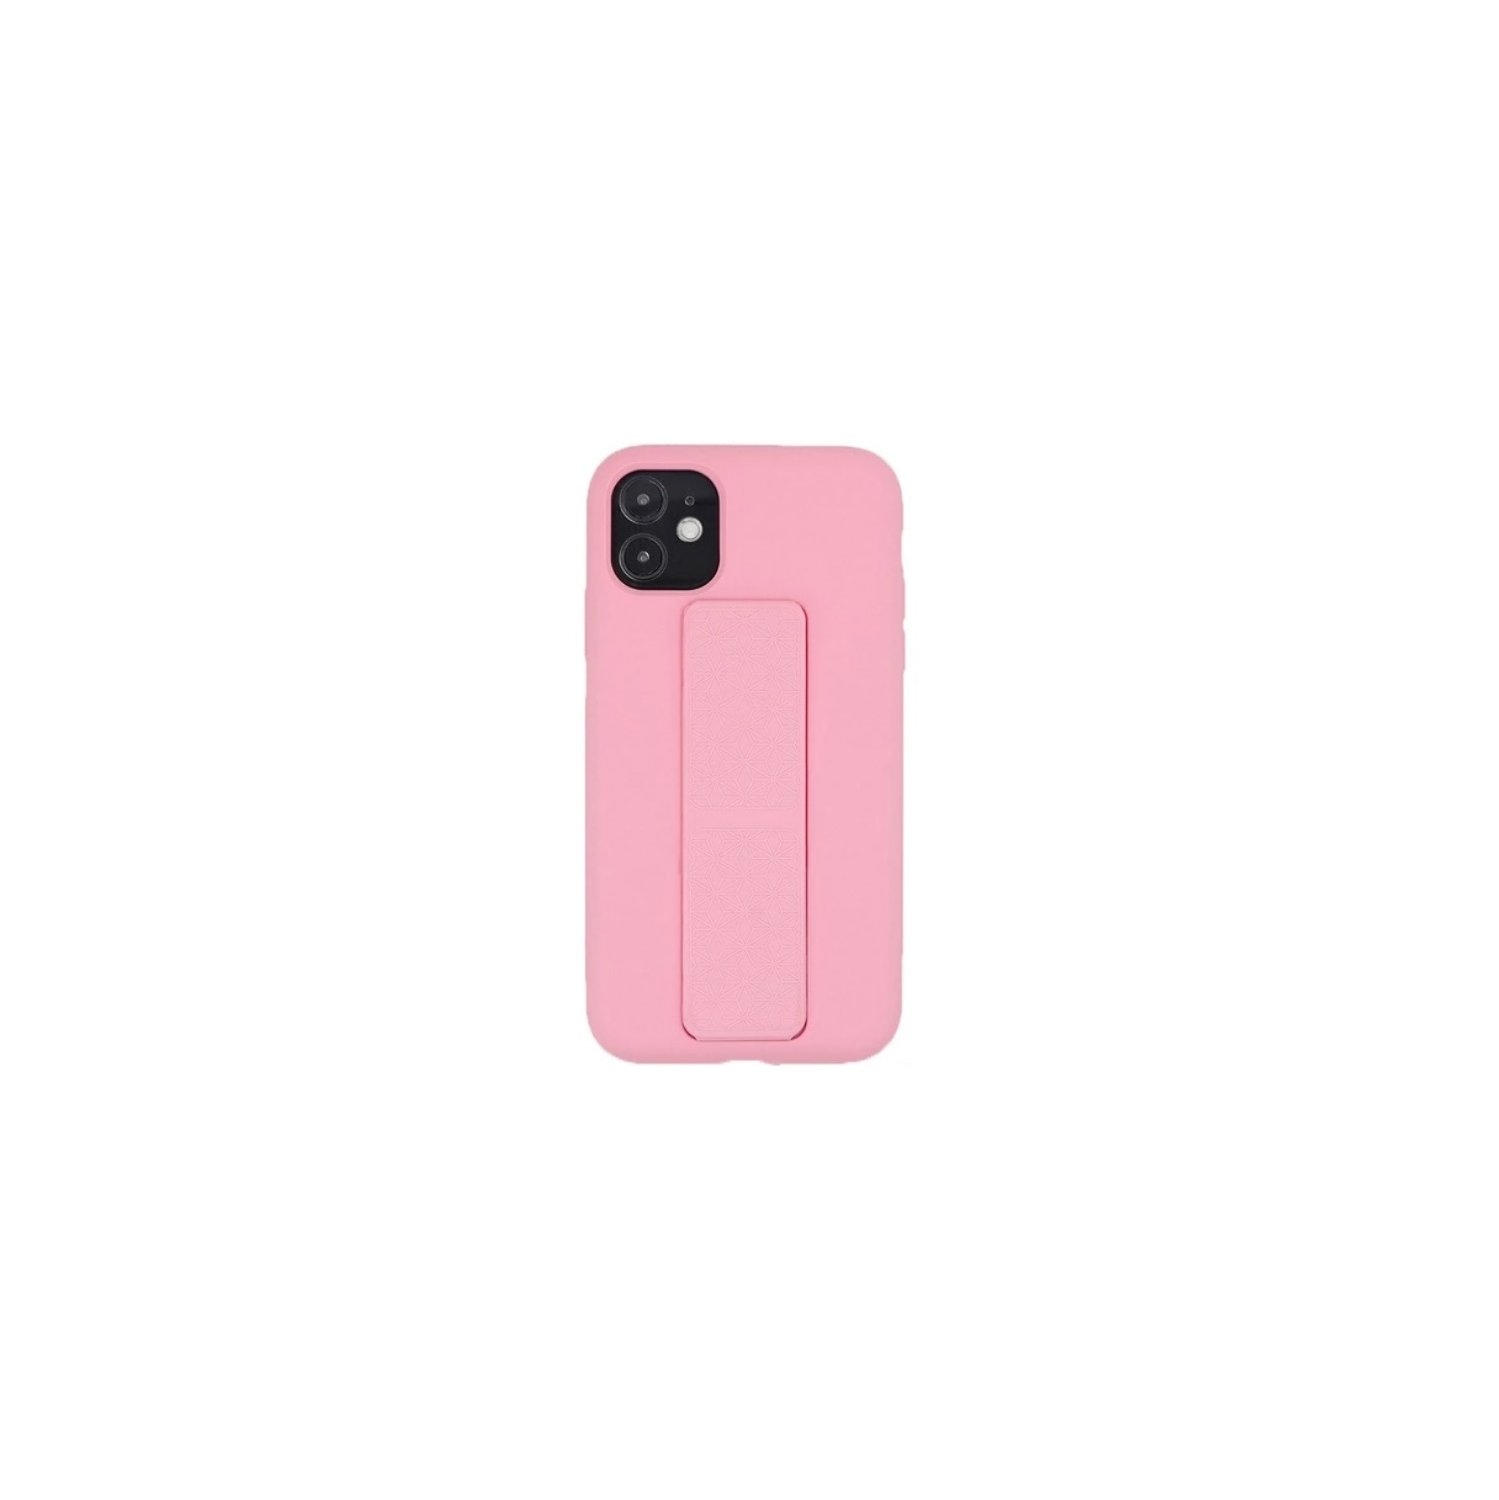 TopSave Silicone Case with Magnetic Stand and Thin Strap Case For Iphone 12 Mini, Pink